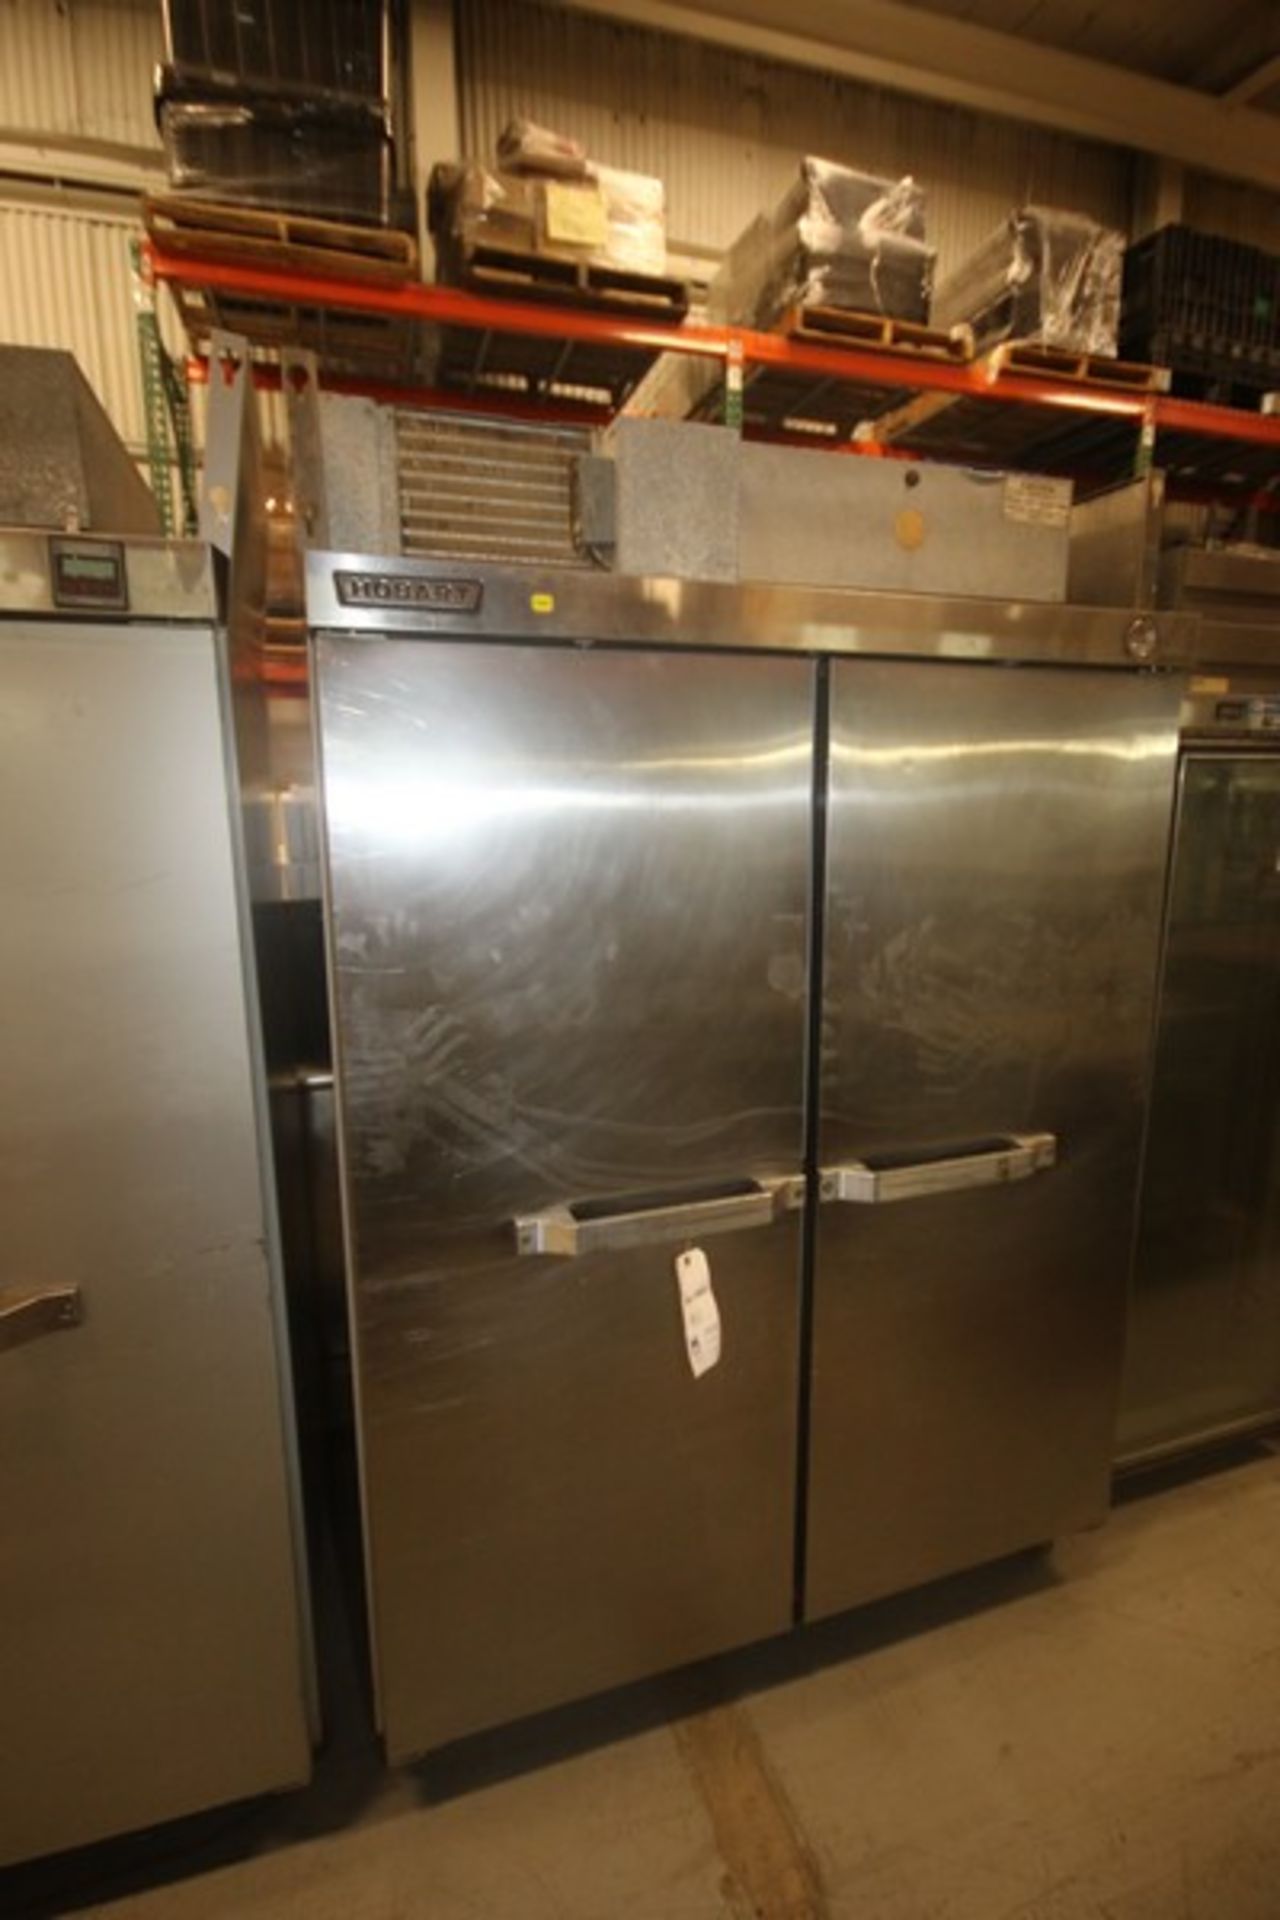 Hobart S/S Double Door Refrigerator,Overall Dims.: Aprox. 54" L x 54" W x 82" H, Mounted on Portable